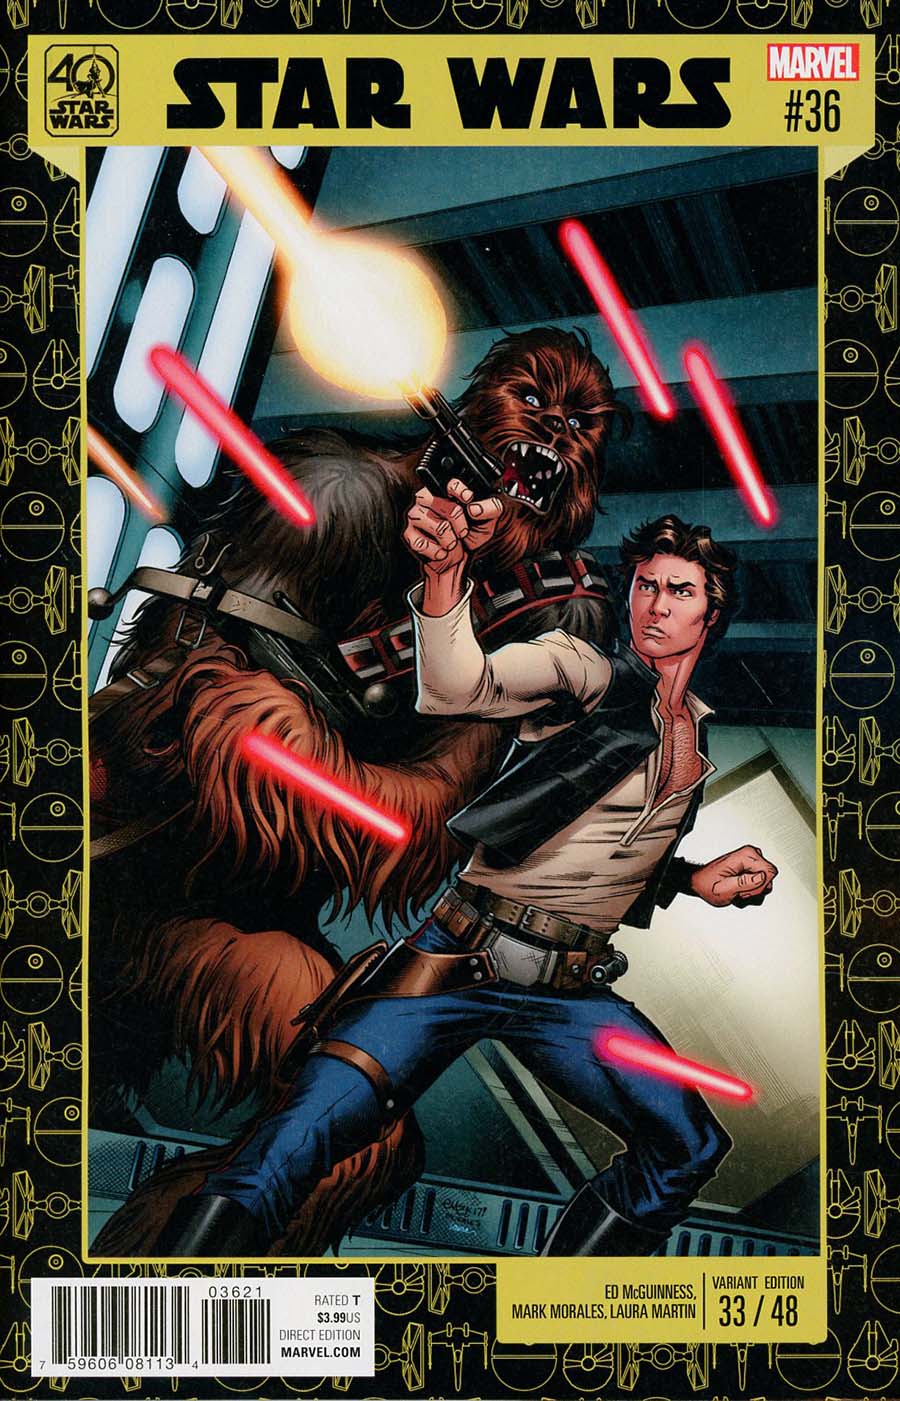 Star Wars Vol 4 #36 Cover B Variant Ed McGuinness Star Wars 40th Anniversary Cover